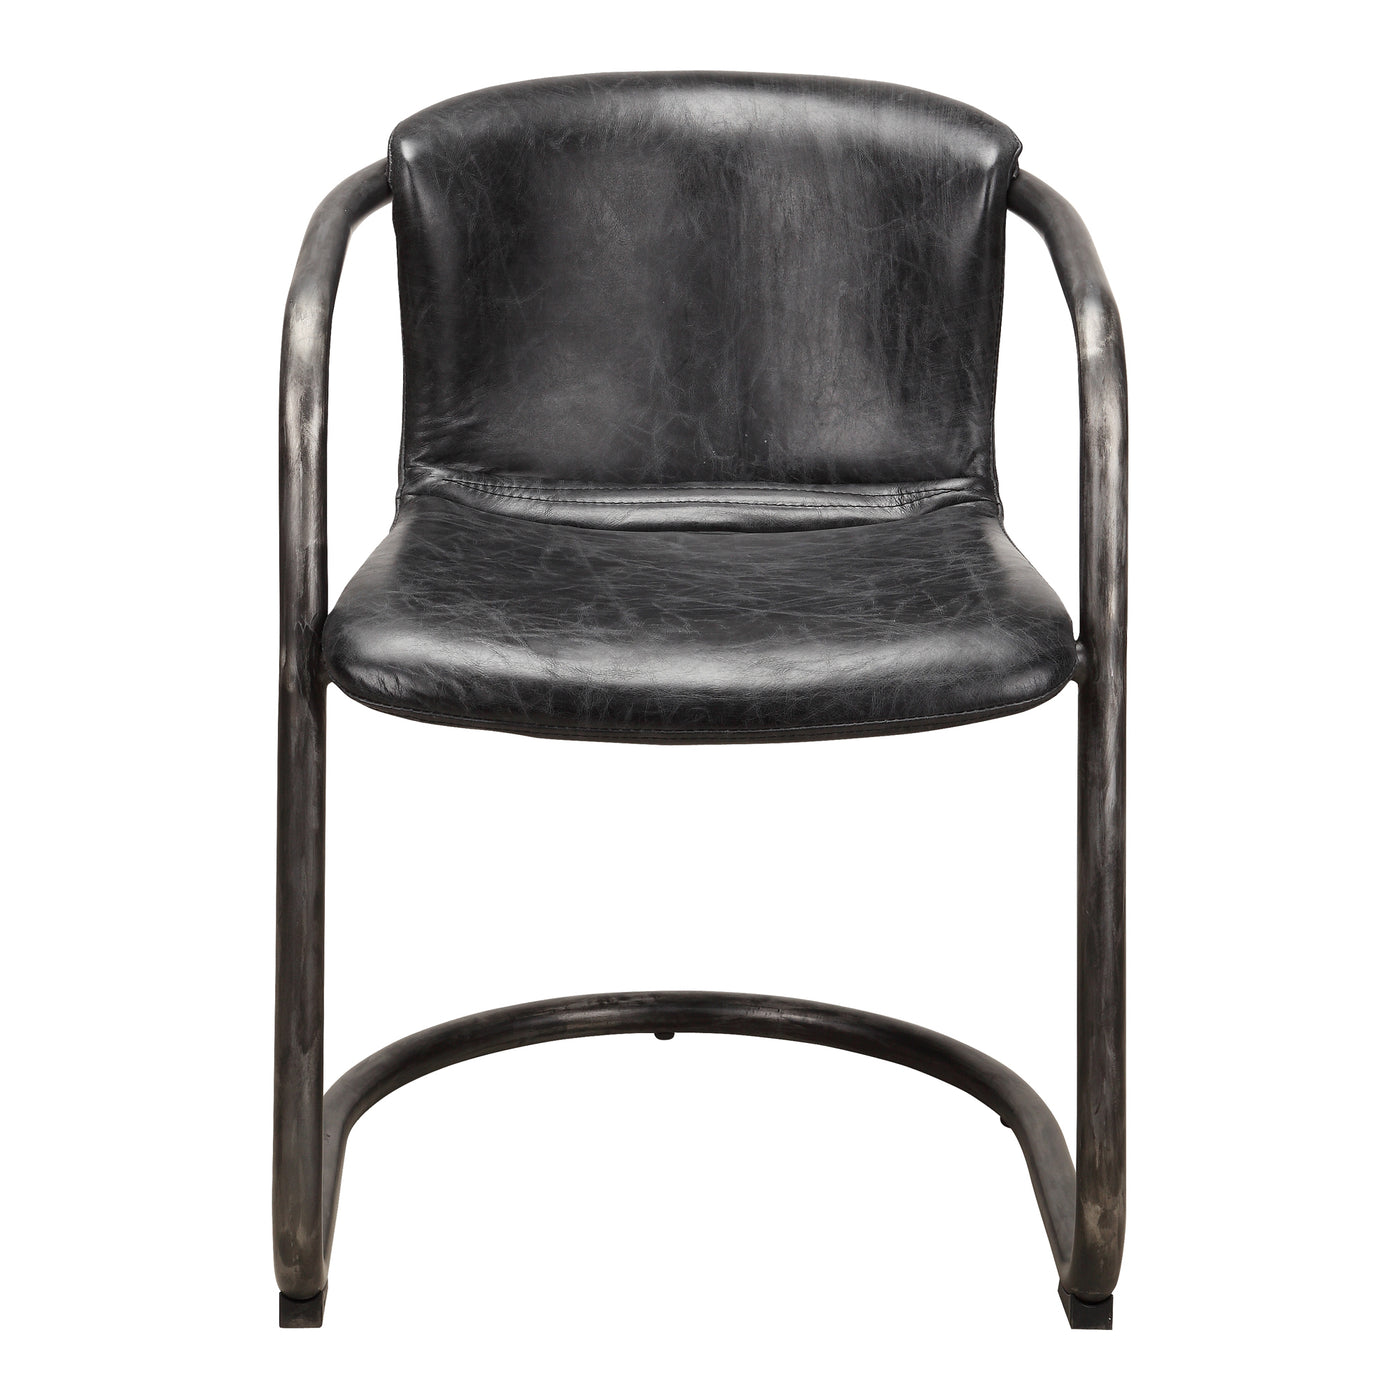 Add the Freeman Dining Chair to create some originality in your design. It has a modern industrial look with a rustic blac...